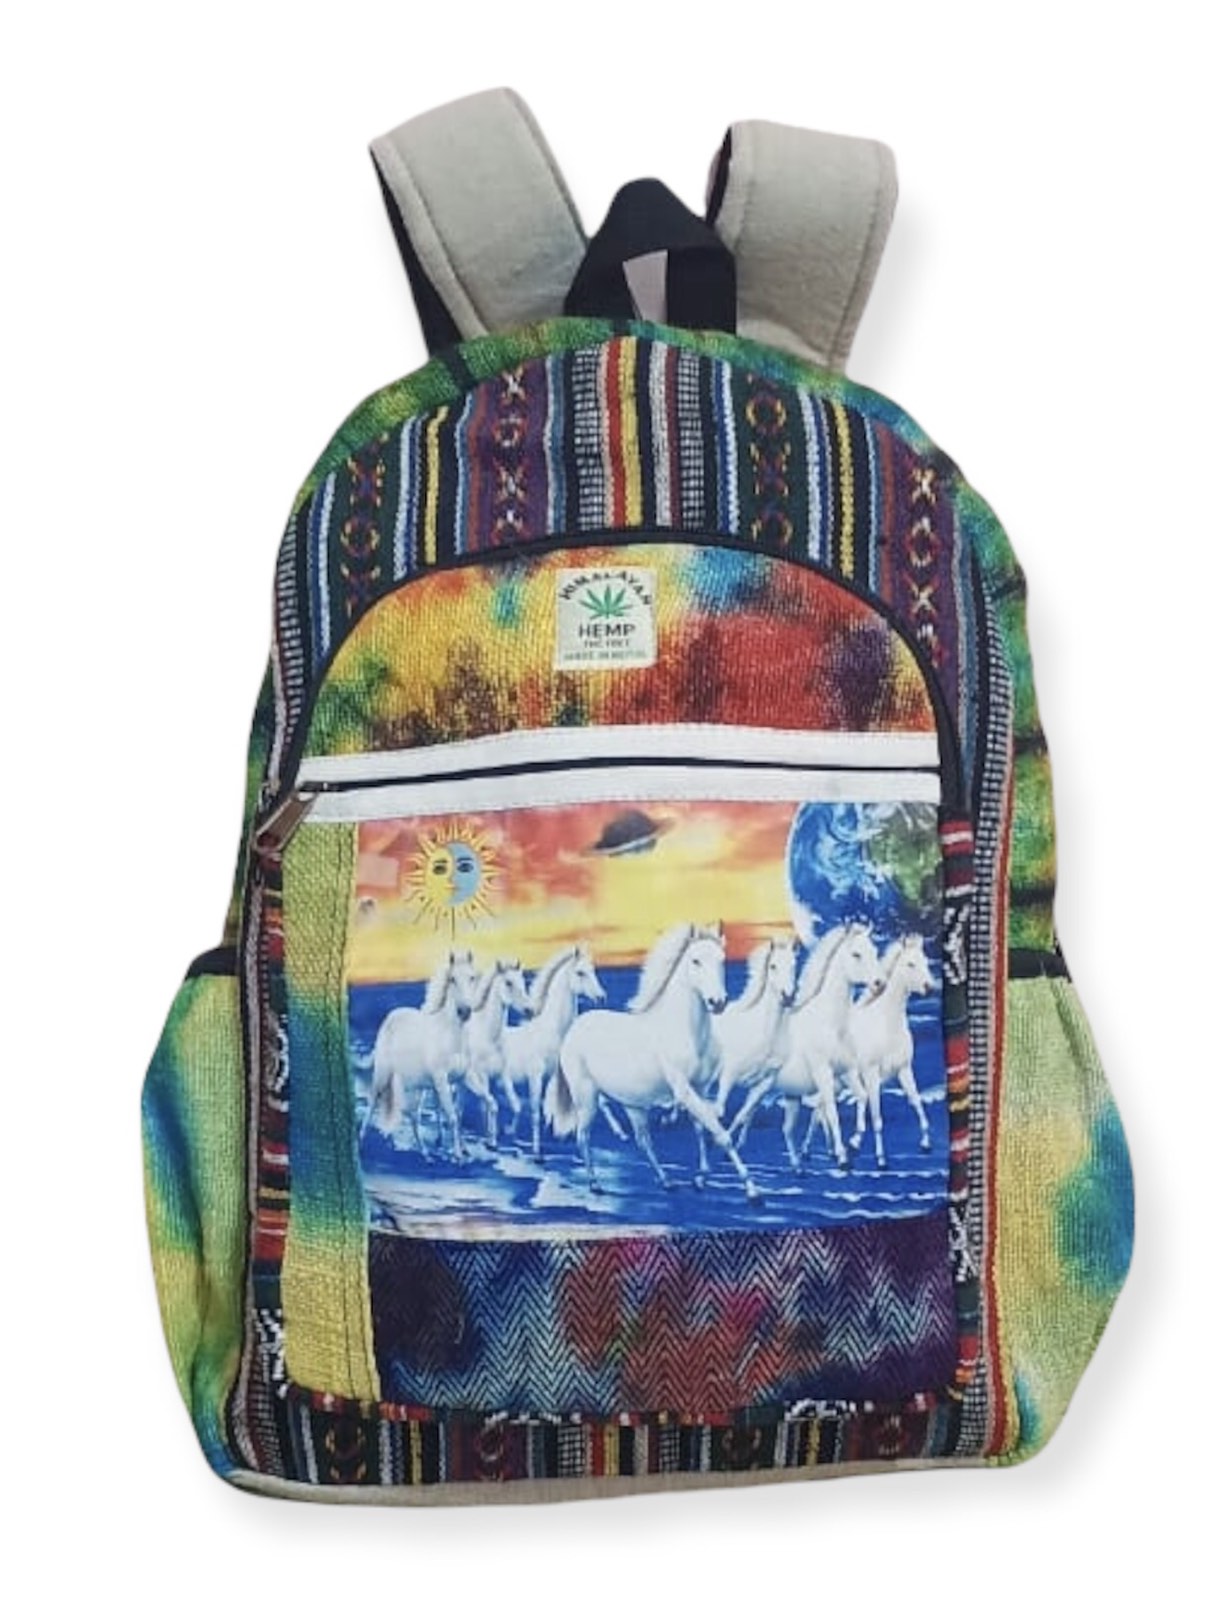 Cotton Hemp Tie Dye  patchwork Power  and success running Seven Horse  BACKPACK RIB1984 